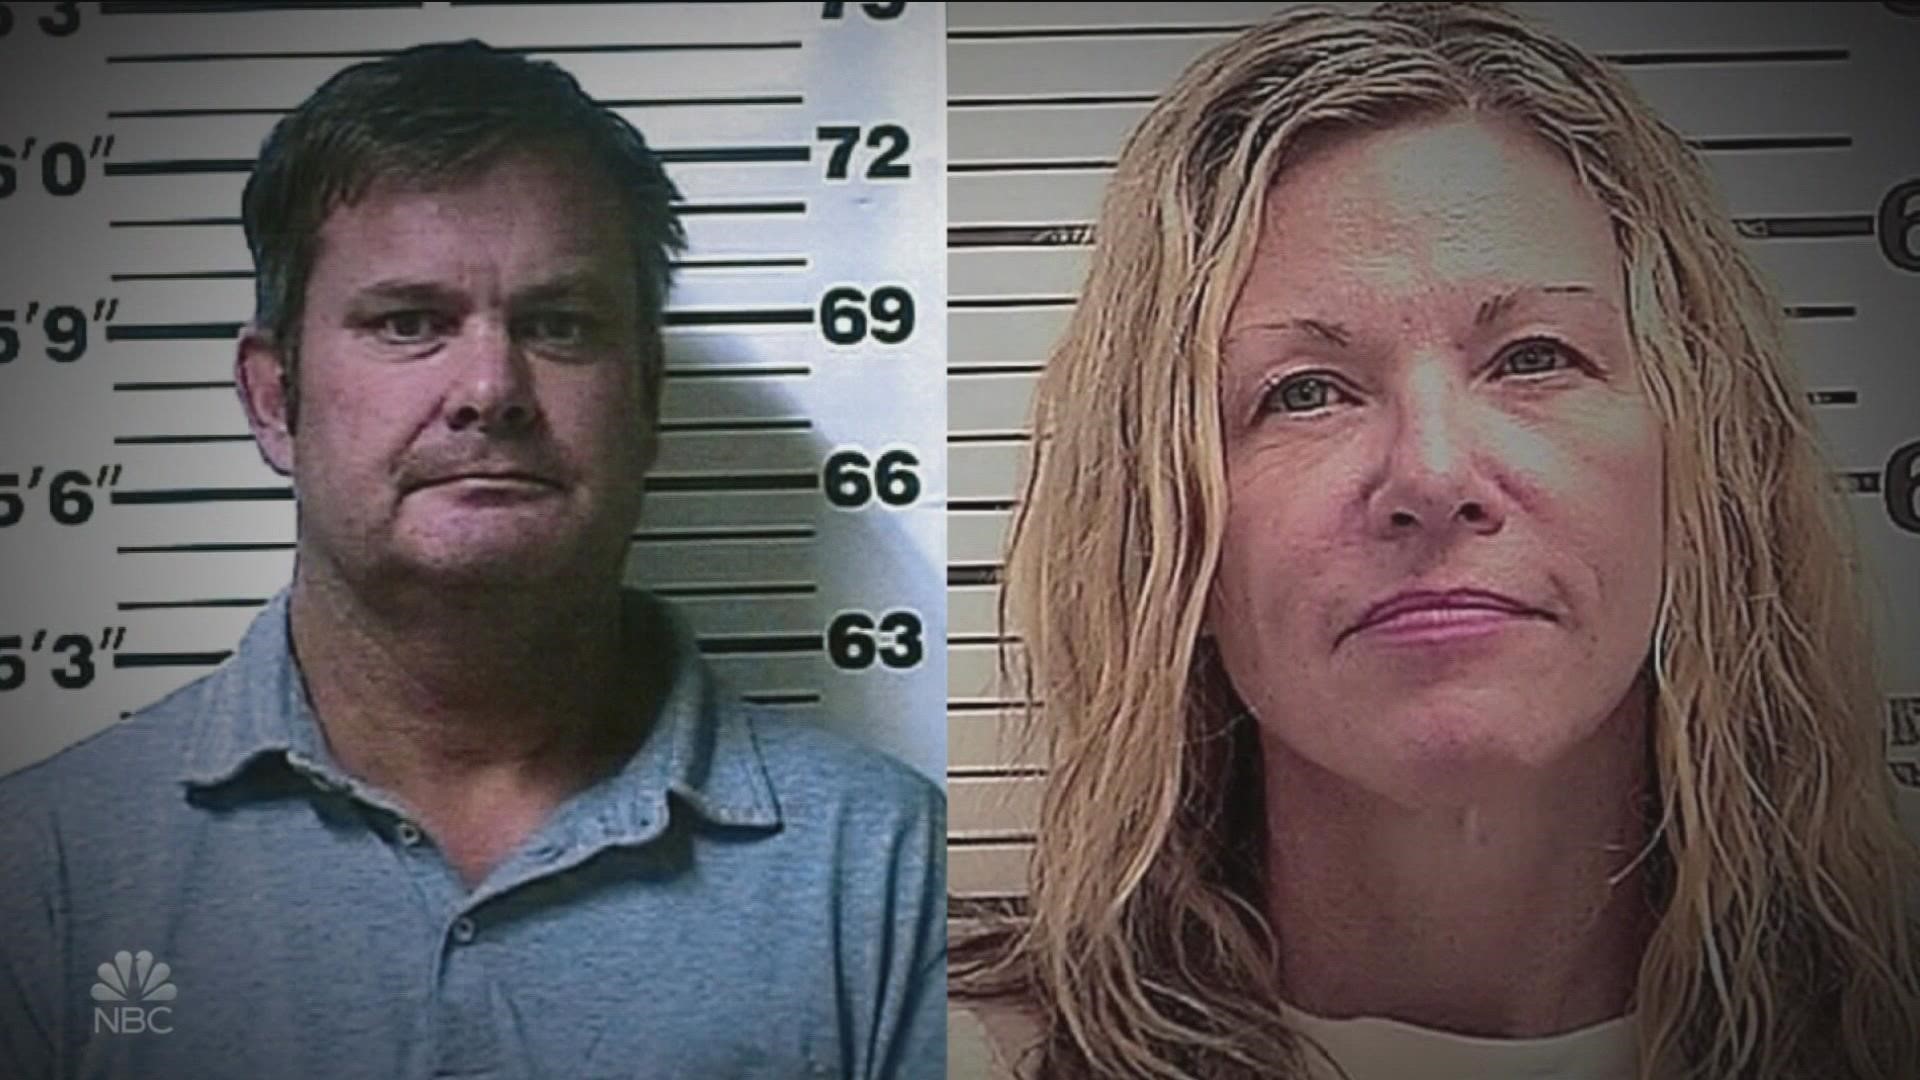 The trial of Lori Vallow and Chad Daybell is set to begin in January. It's a case that's already drawn national media coverage, books and a Netflix documentary.